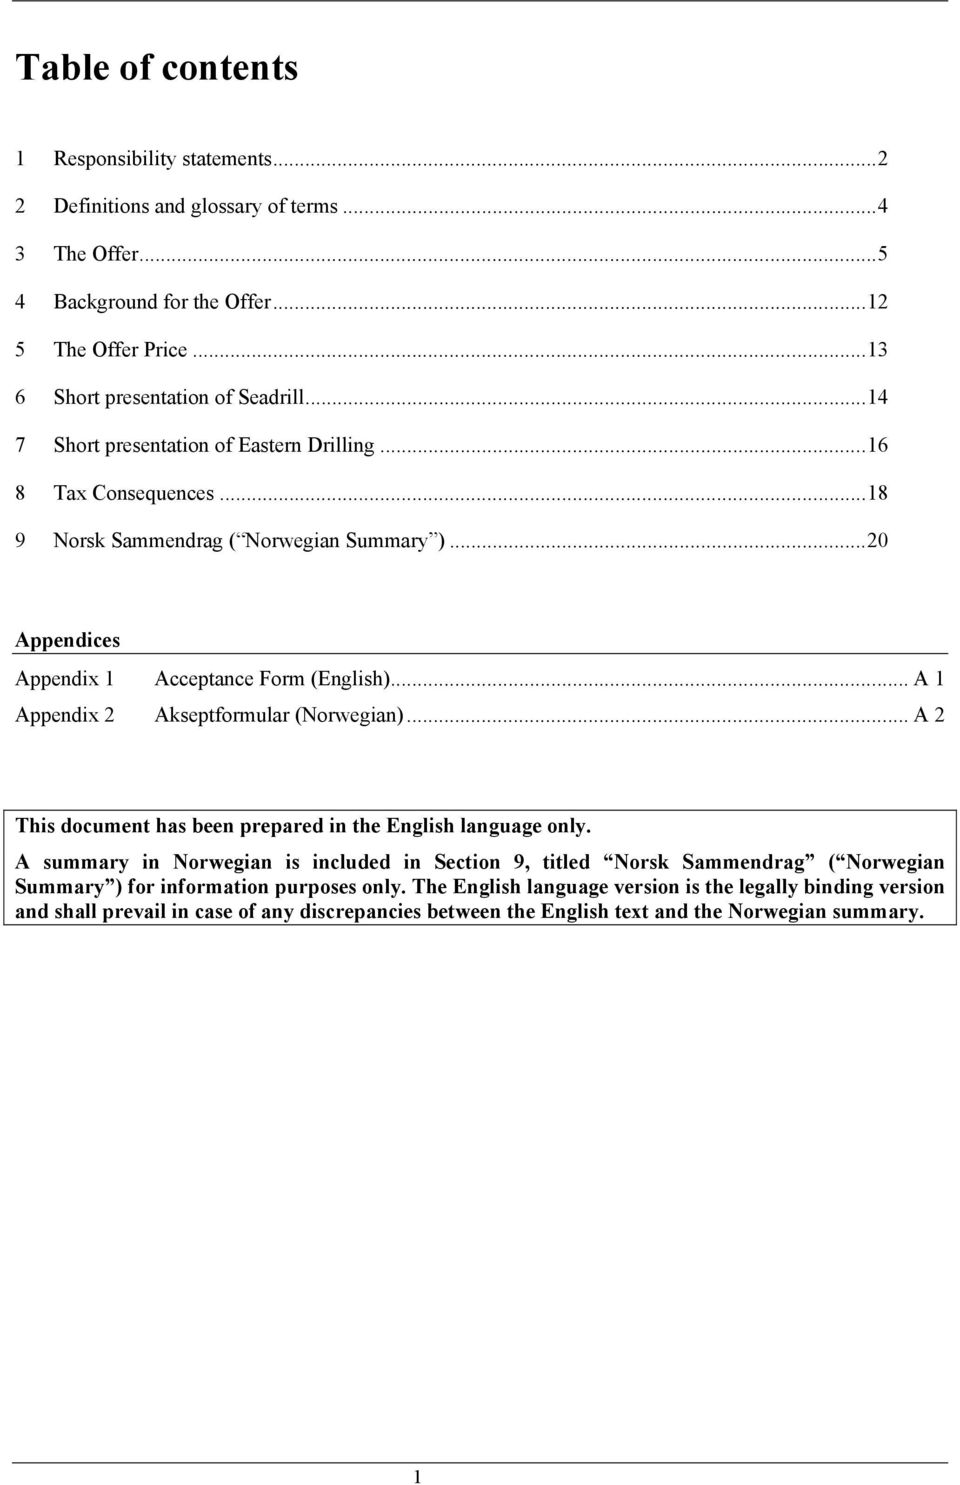 ..20 Appendices Appendix 1 Acceptance Form (English)... A 1 Appendix 2 Akseptformular (Norwegian)... A 2 This document has been prepared in the English language only.